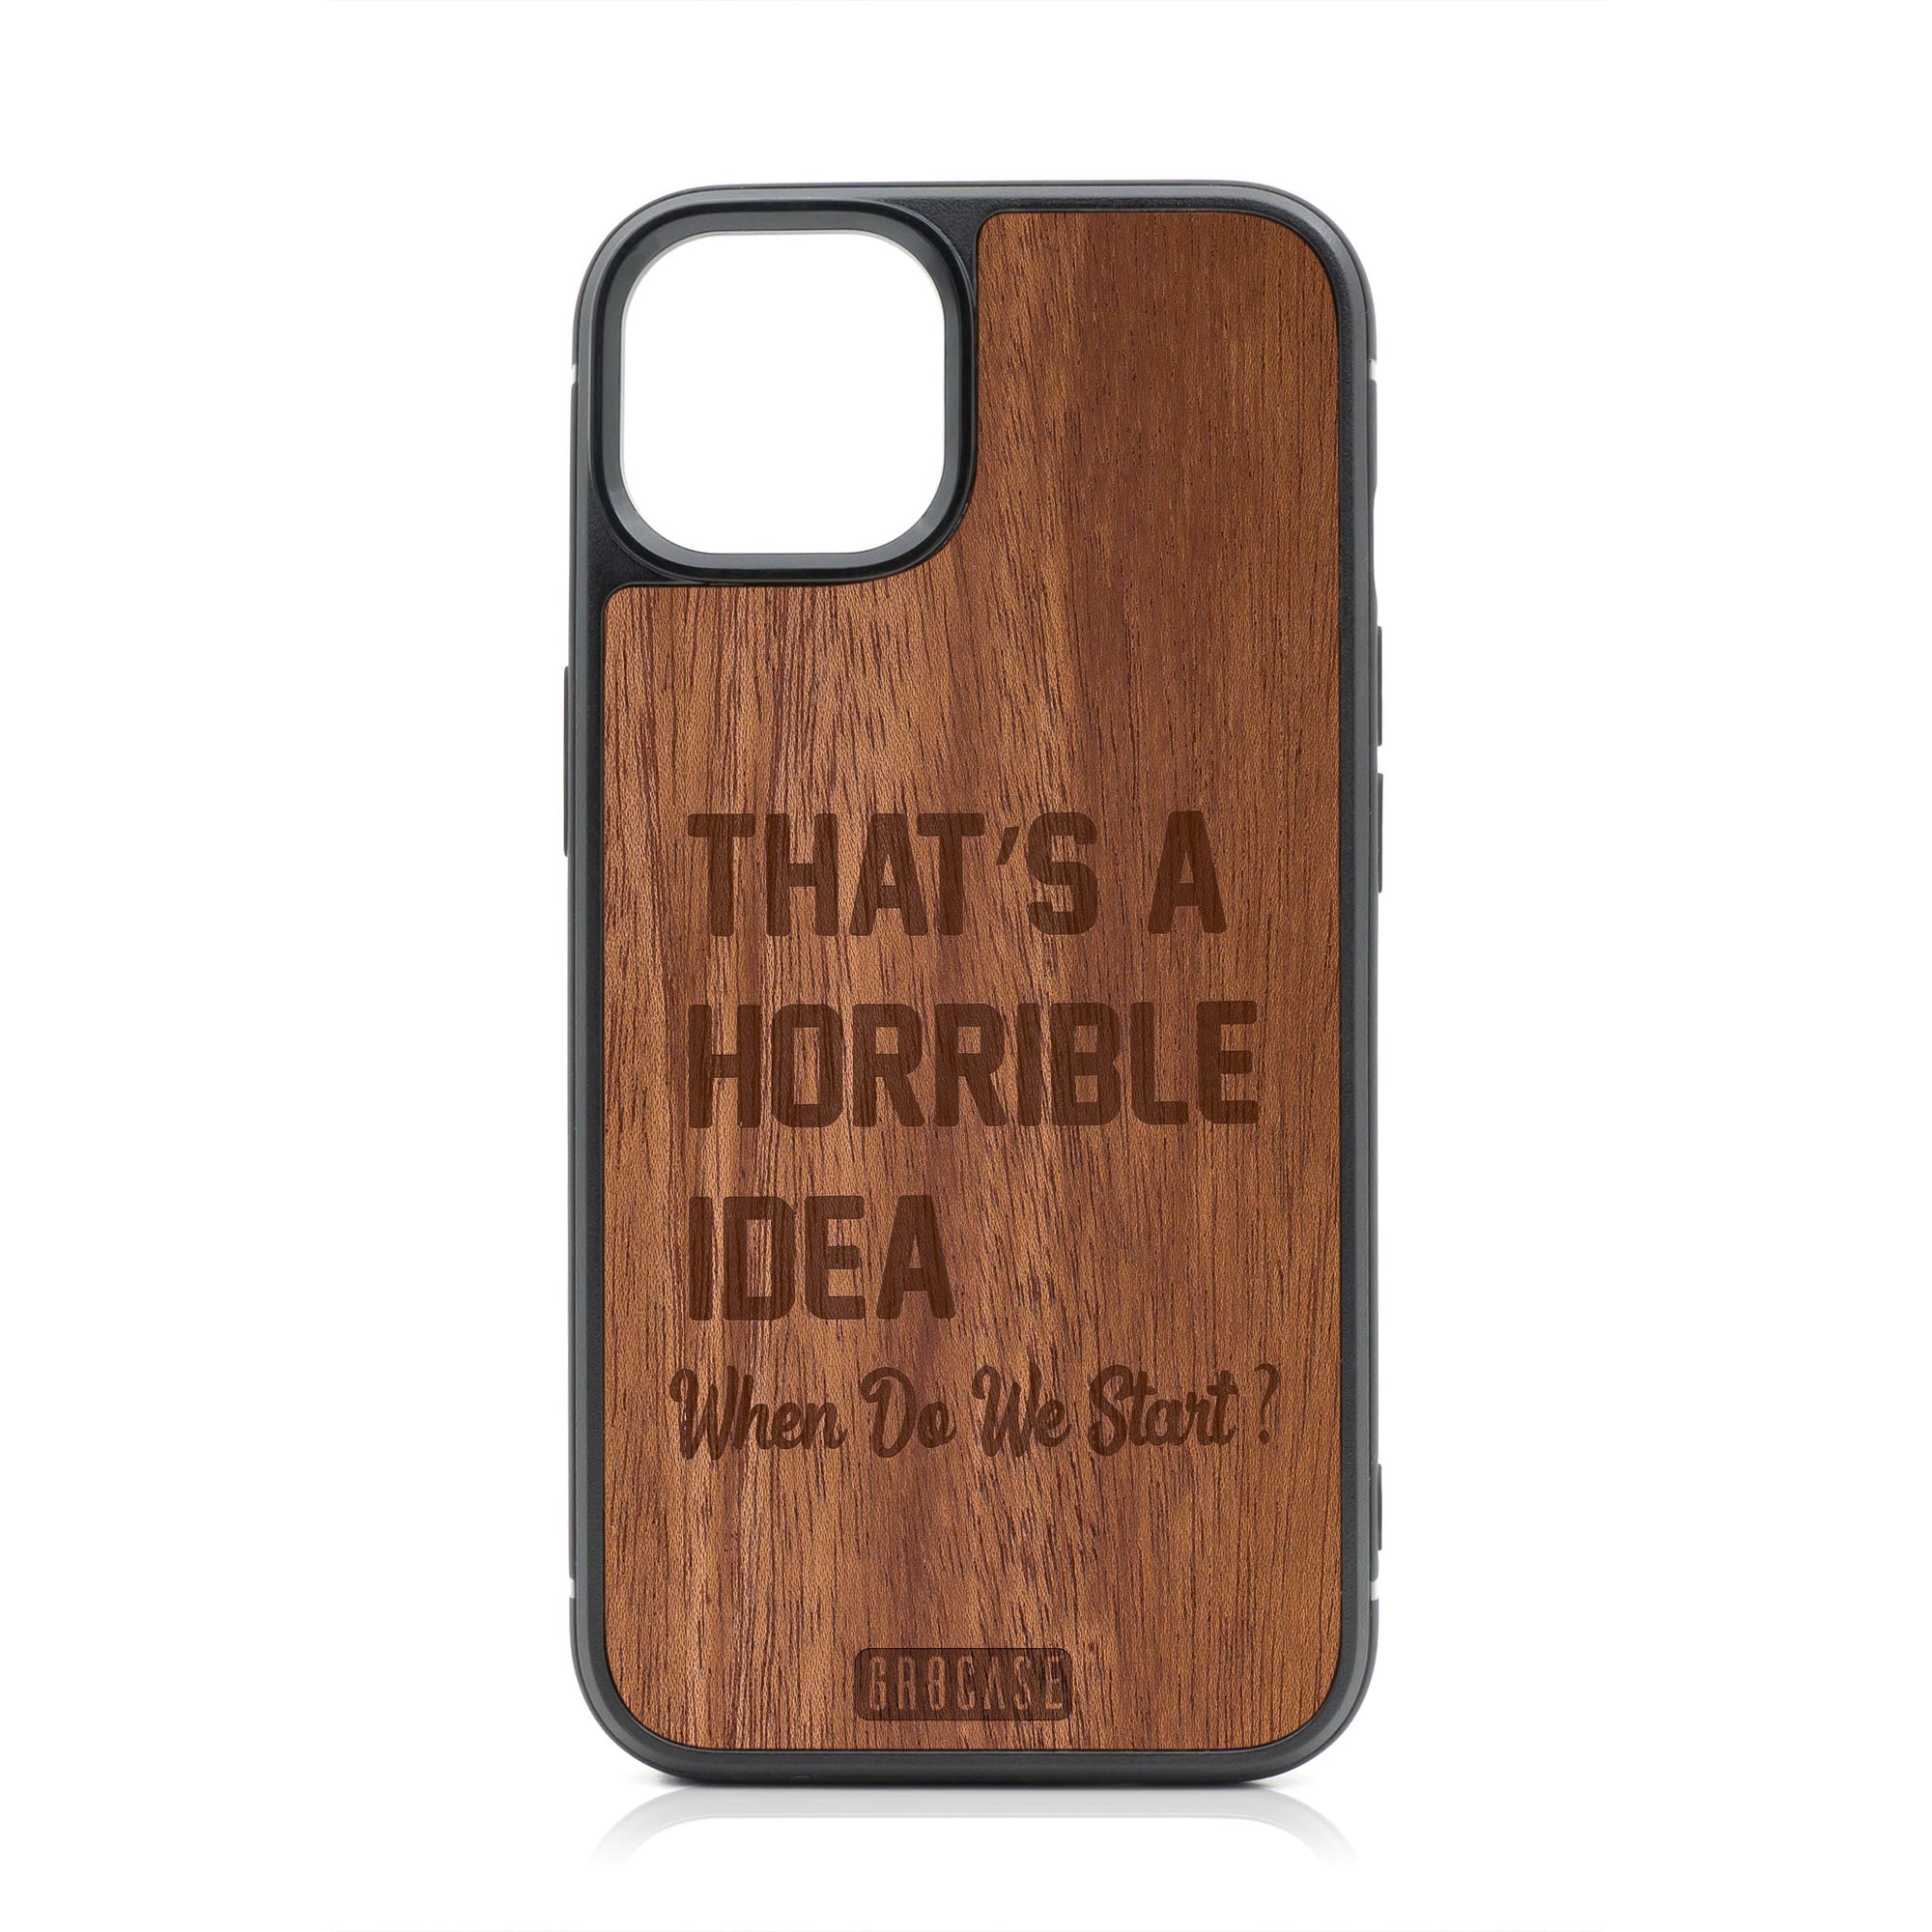 That's A Horrible Idea When Do We Start? Design Wood Case For iPhone 13